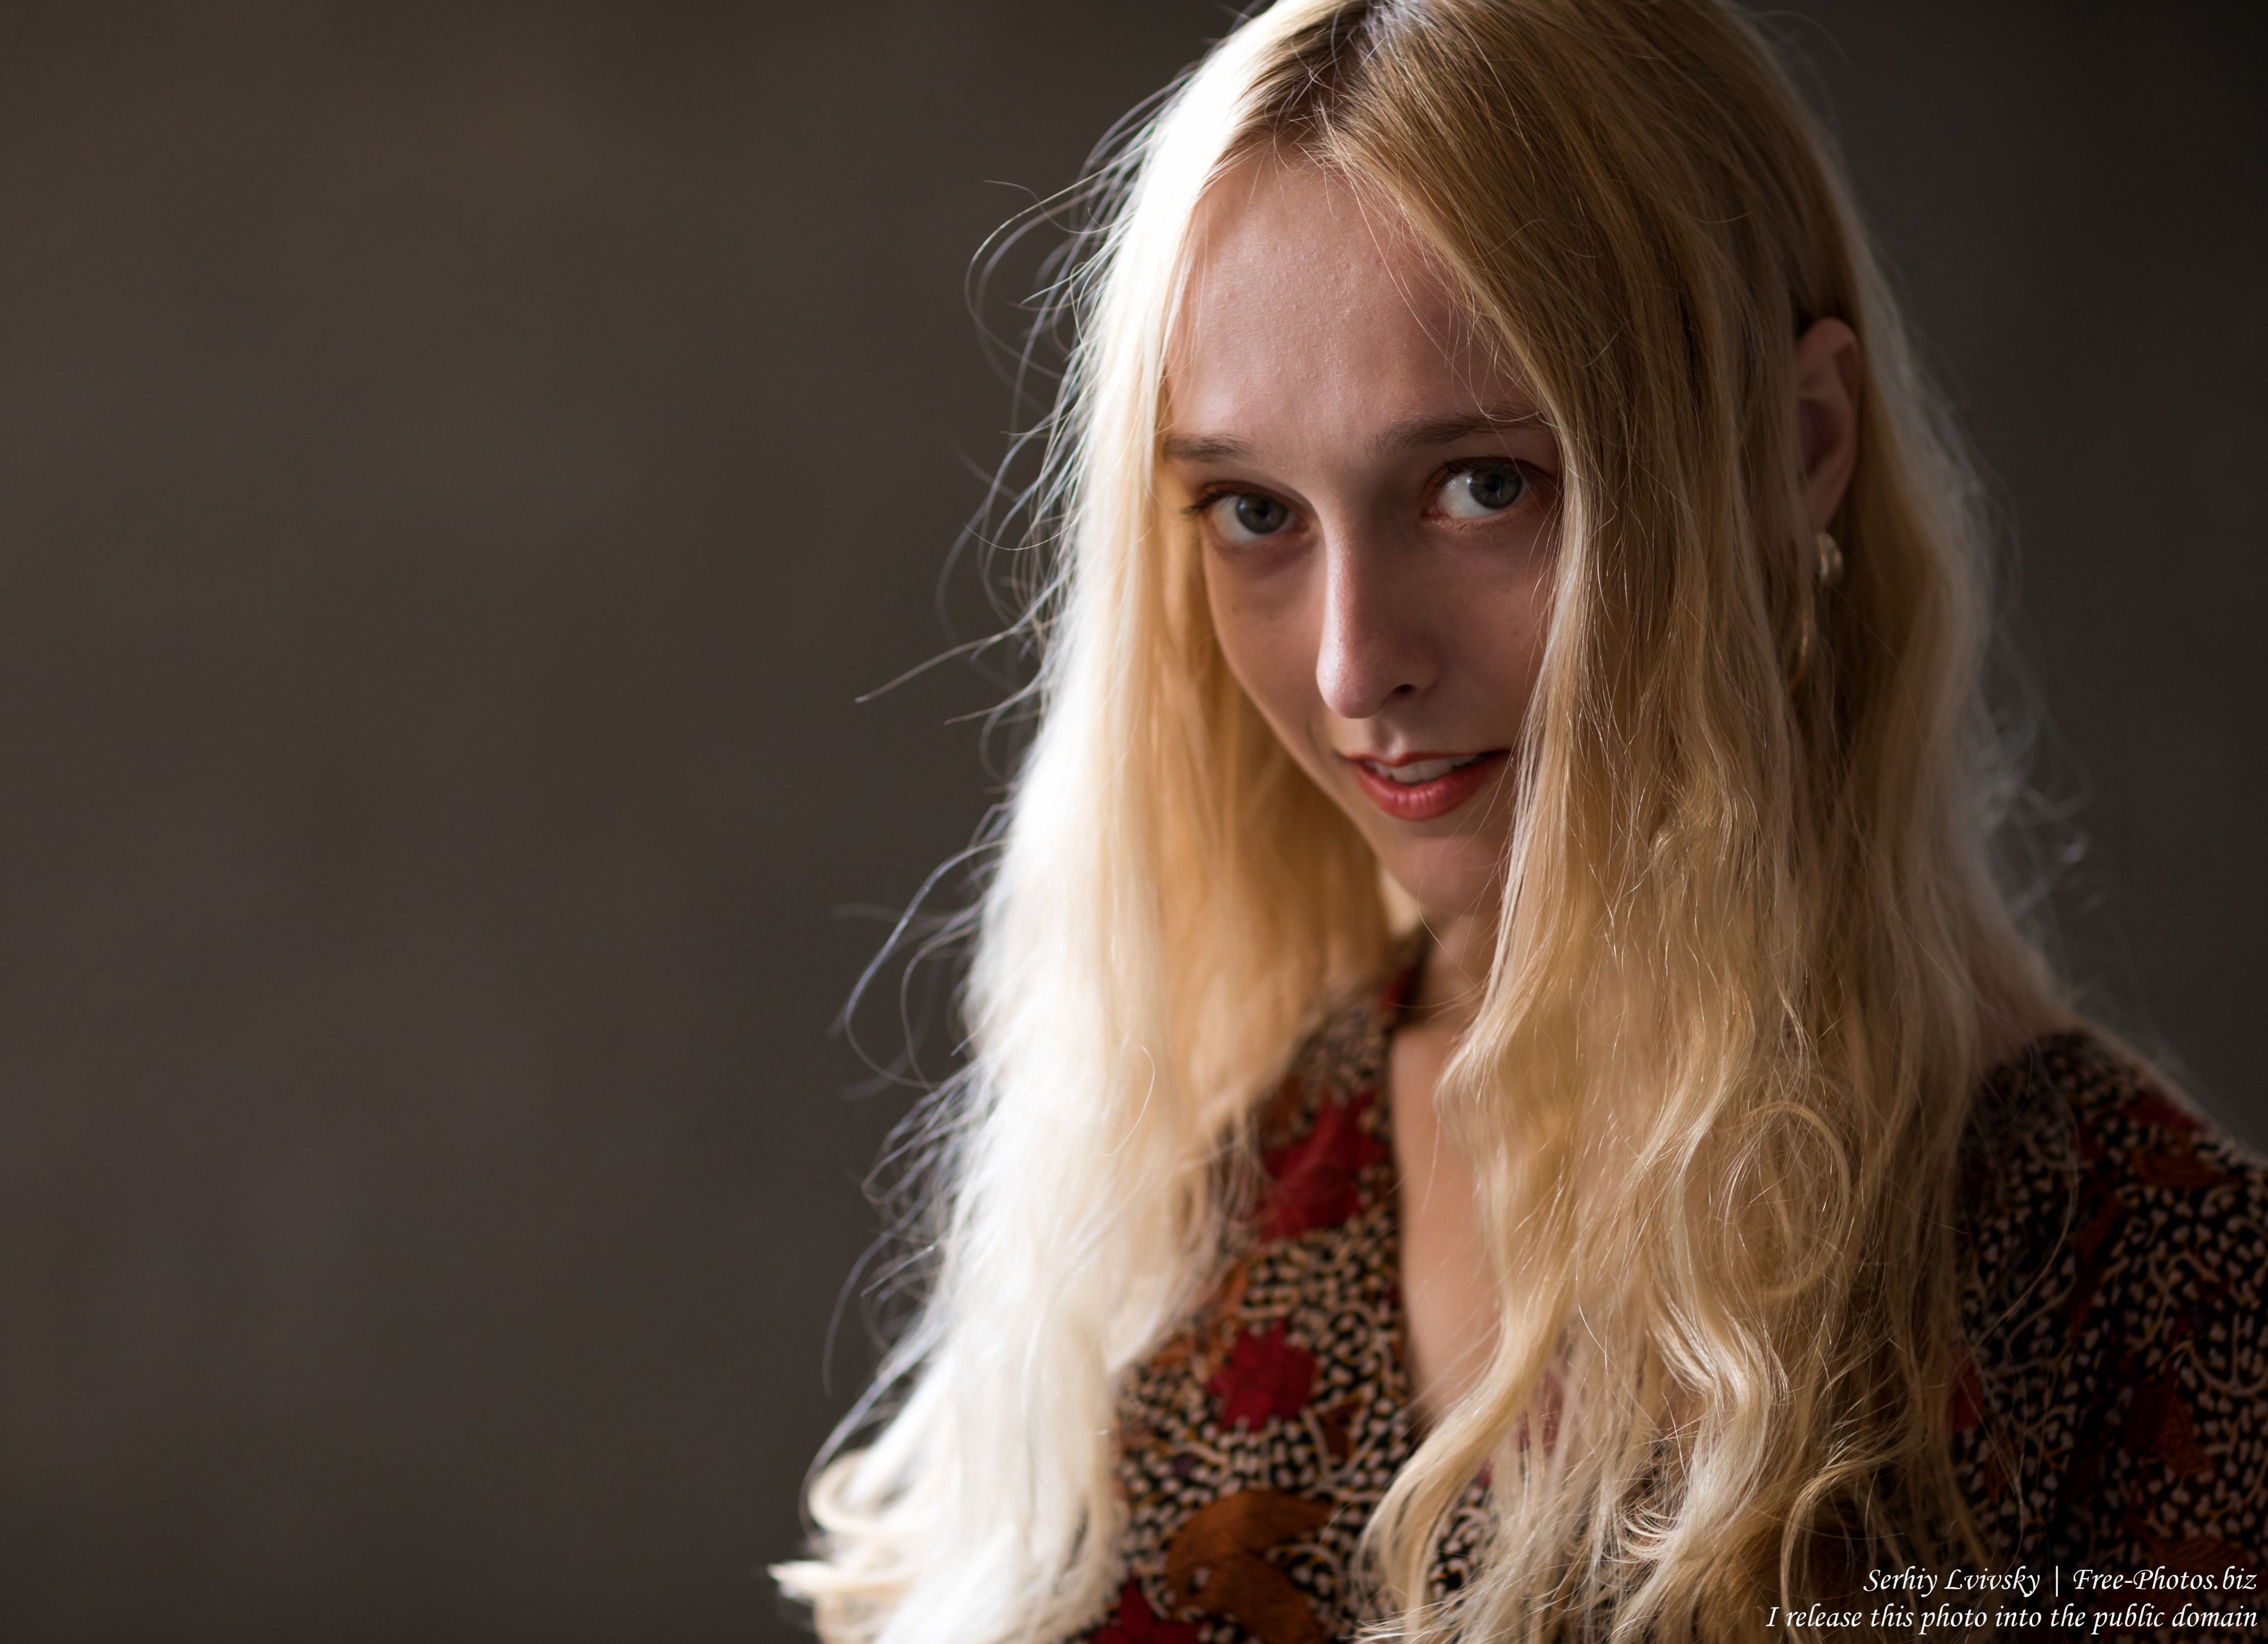 Sonya - a 21-year-old natural blonde girl photographed in July 2019 by Serhiy Lvivsky, picture 23